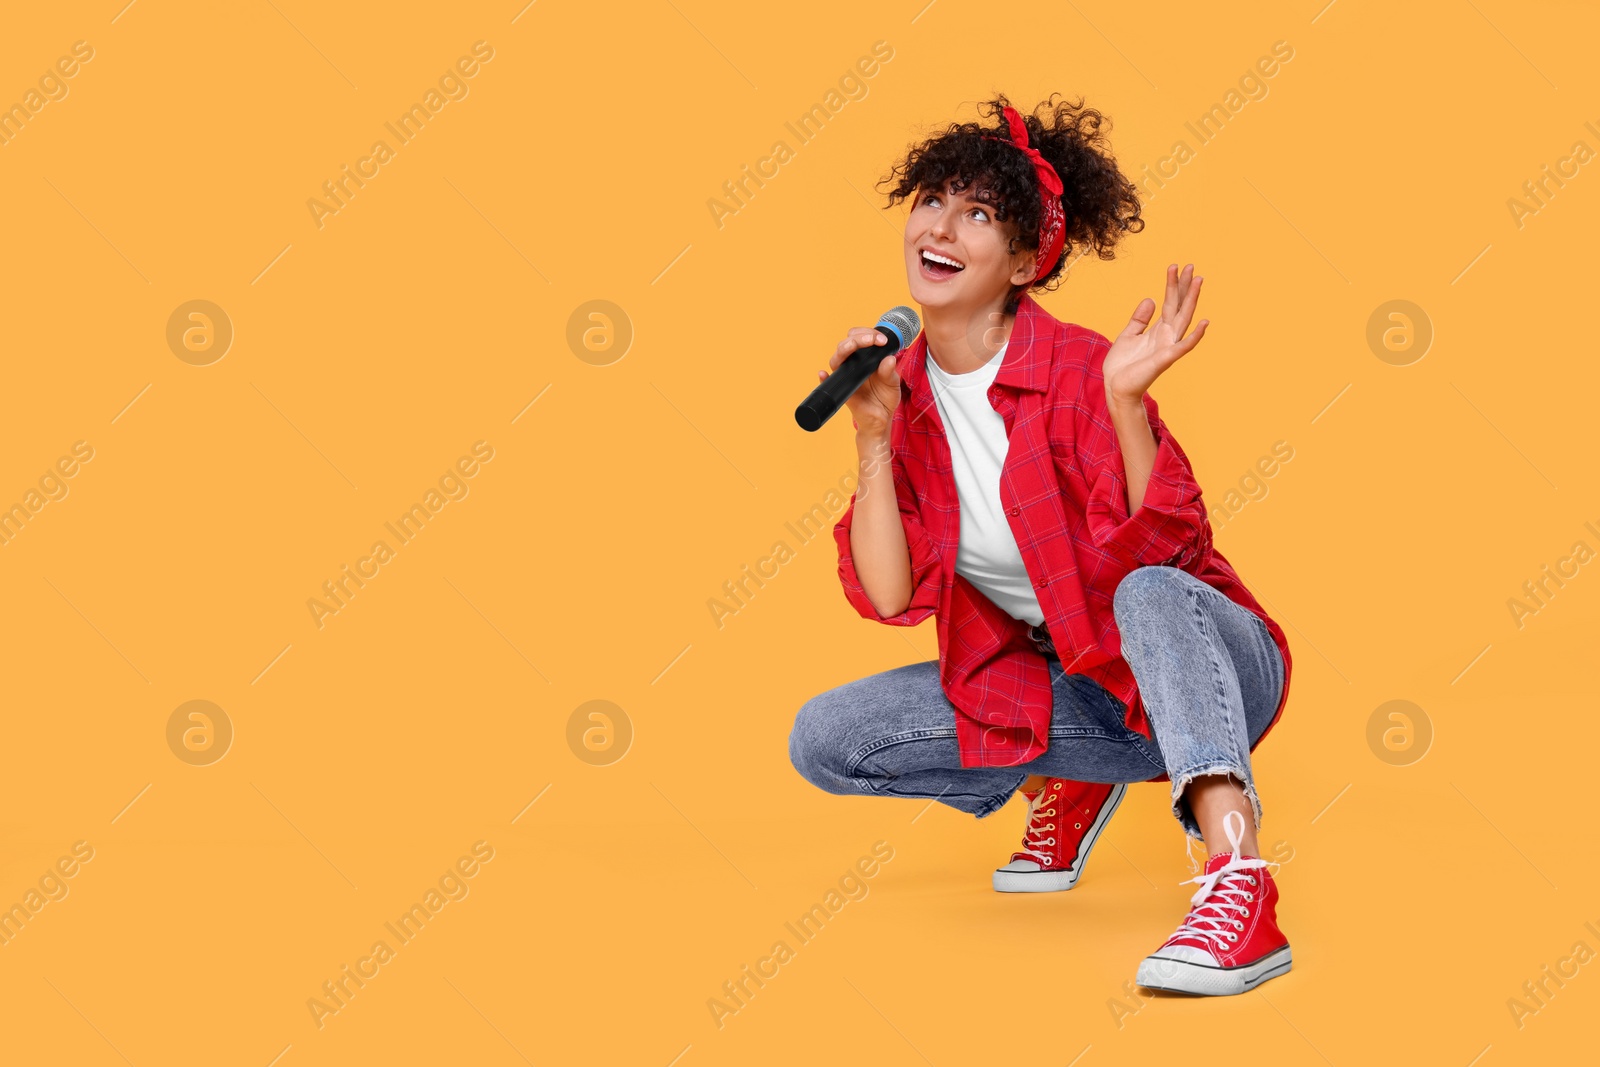 Photo of Beautiful young woman with microphone singing on yellow background. Space for text